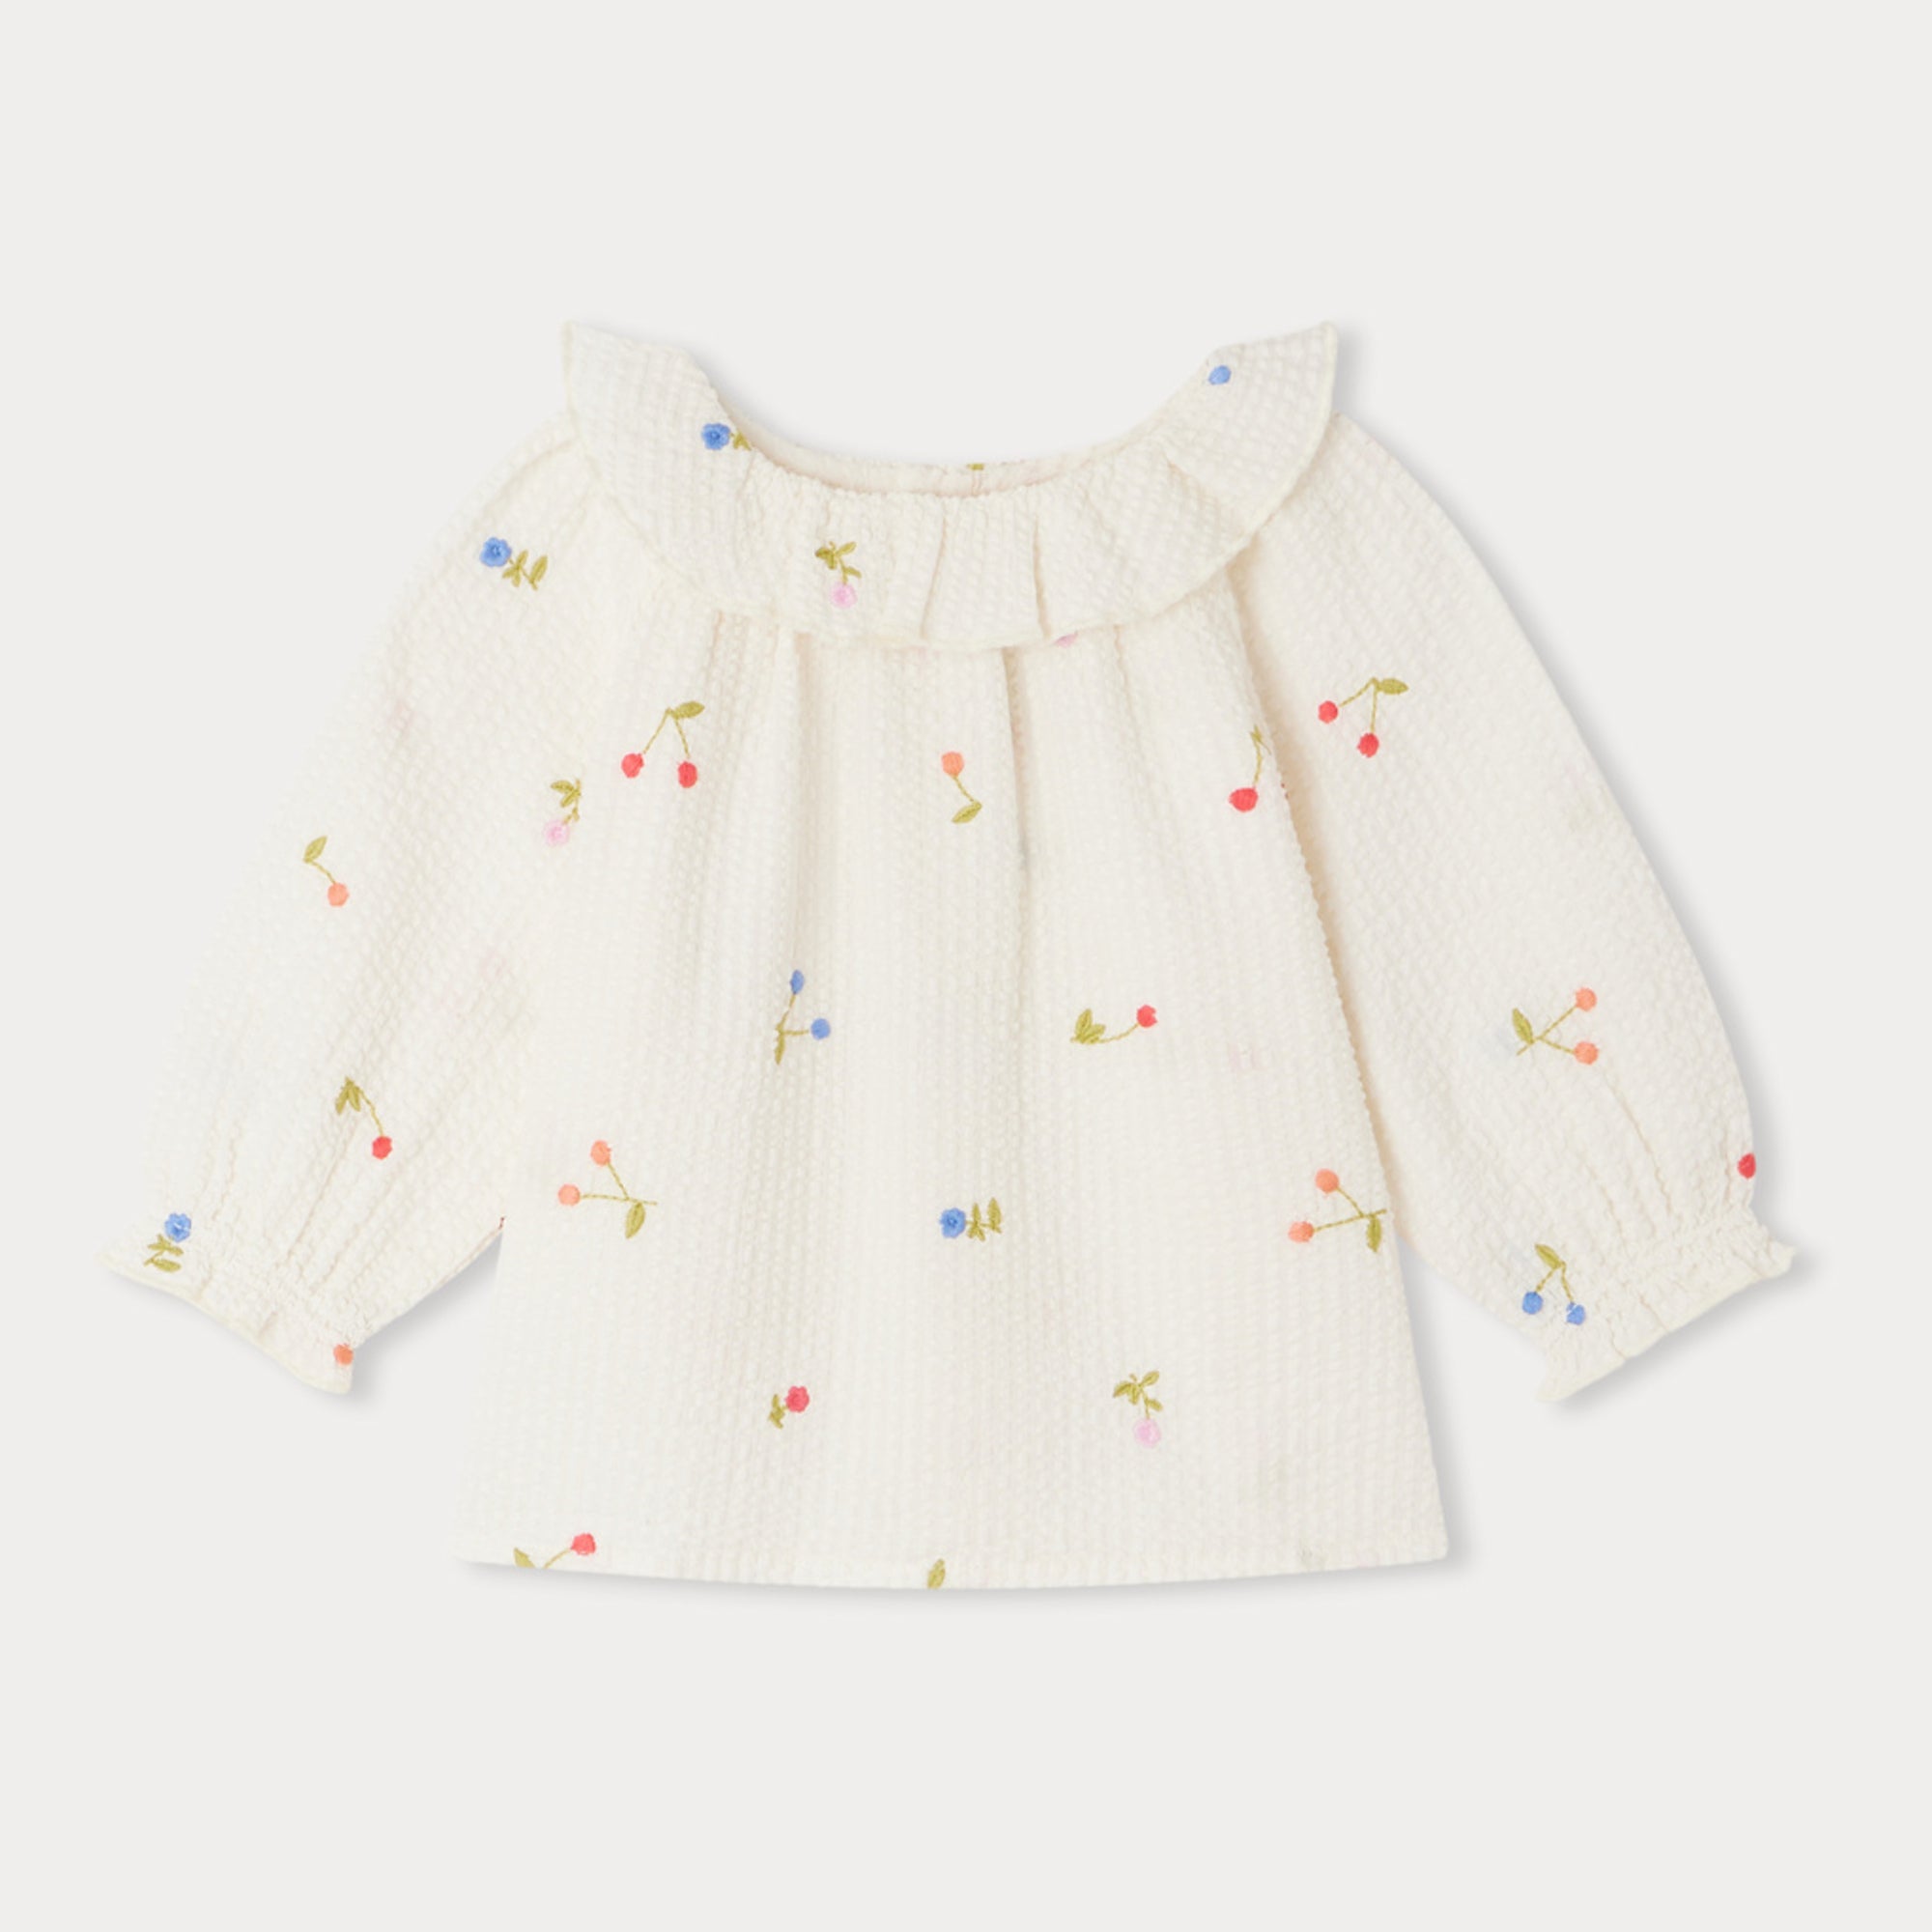 Baby Girls White Cherry Embroidered Cotton Top